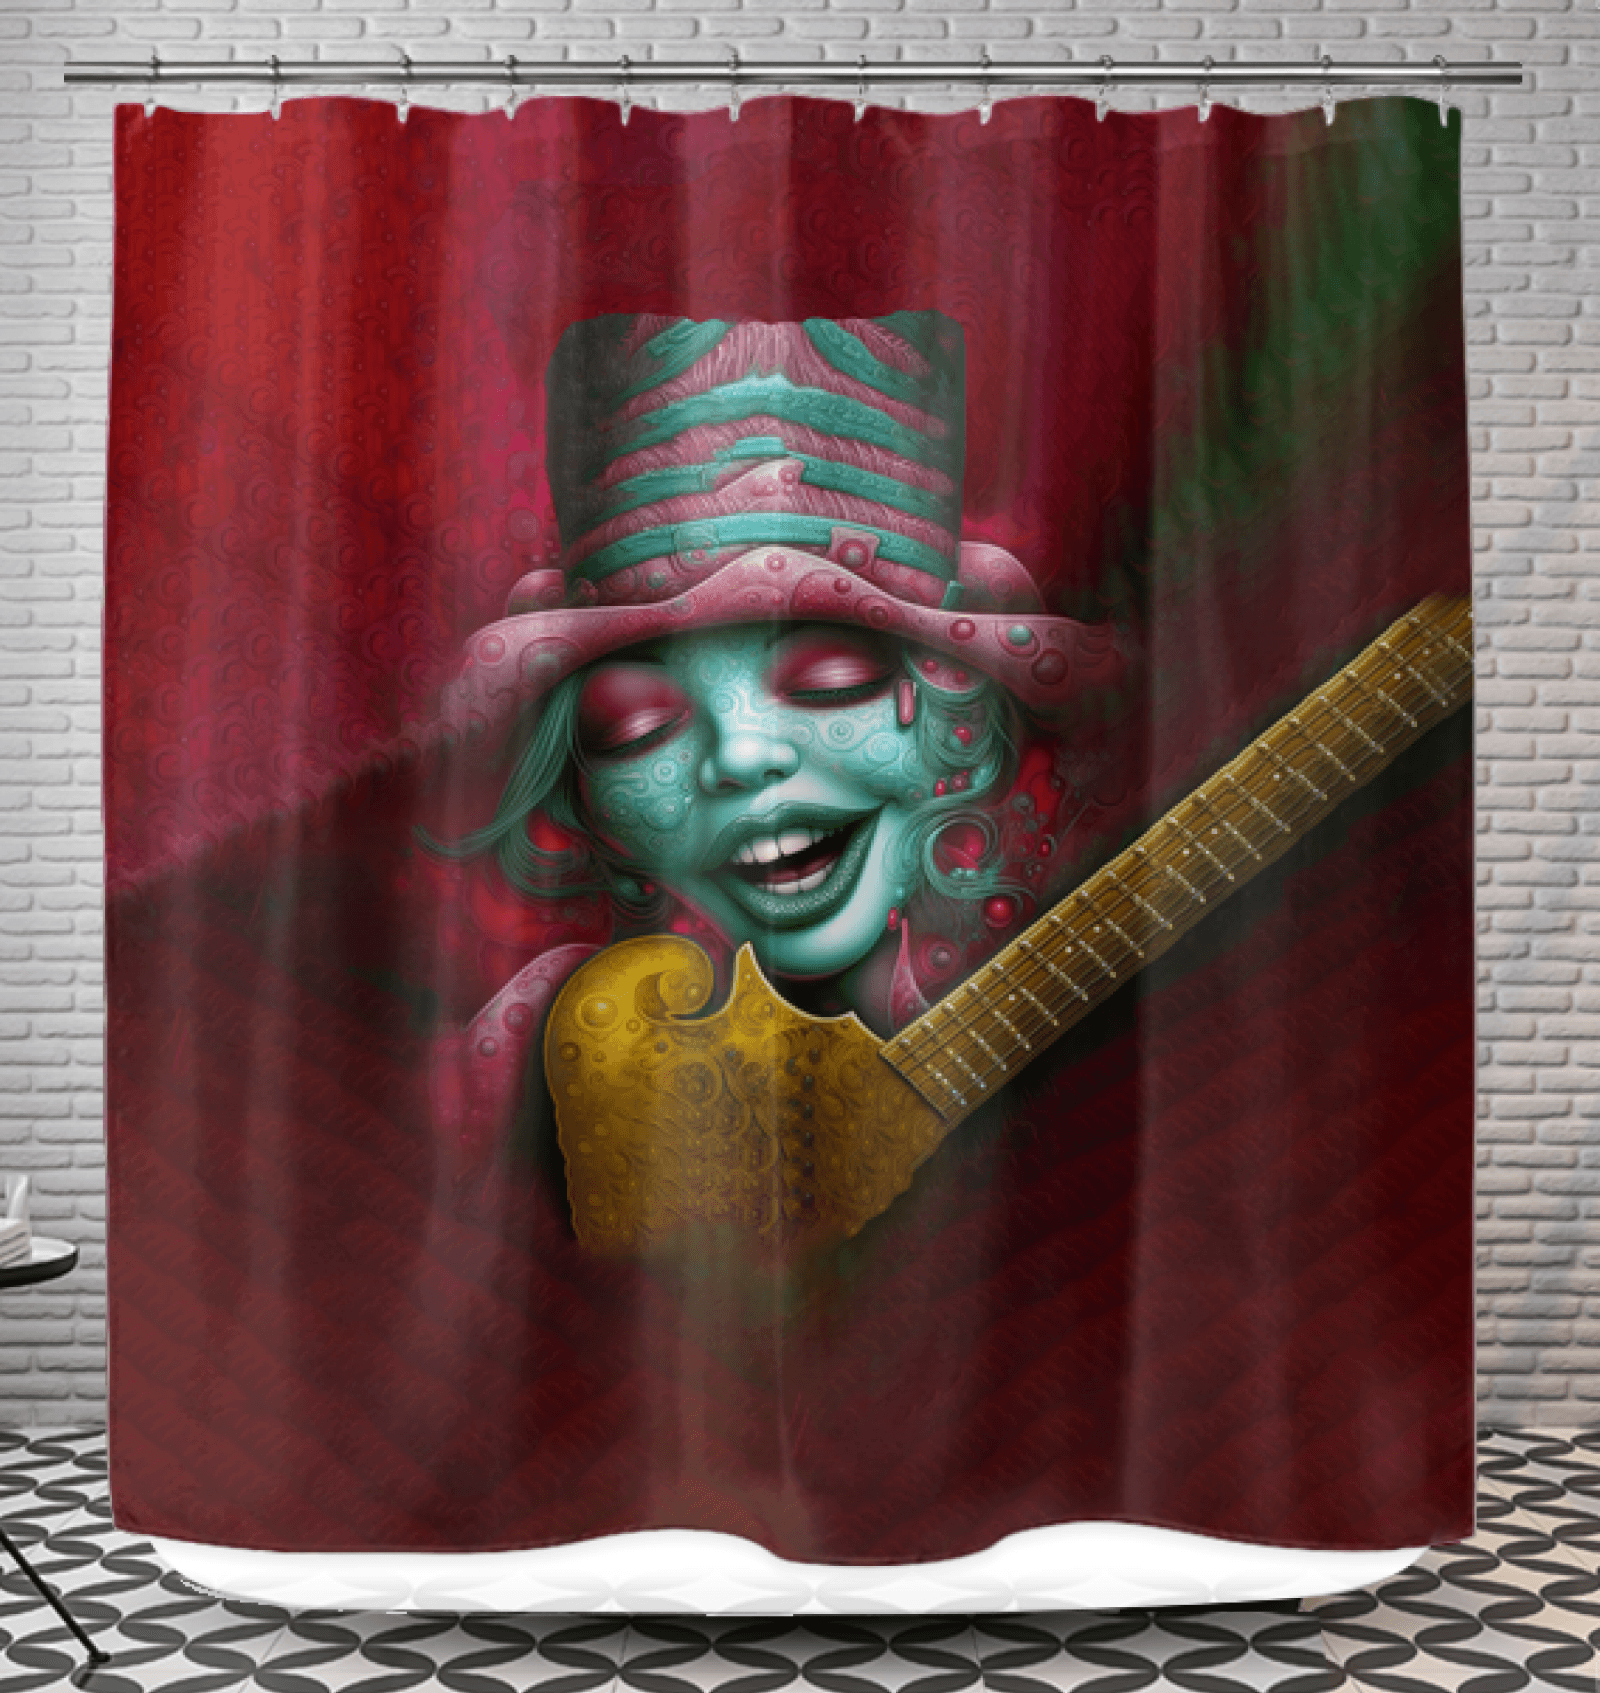 Colorful 'Whimsical Wonders II' themed shower curtain in a decorated bathroom.